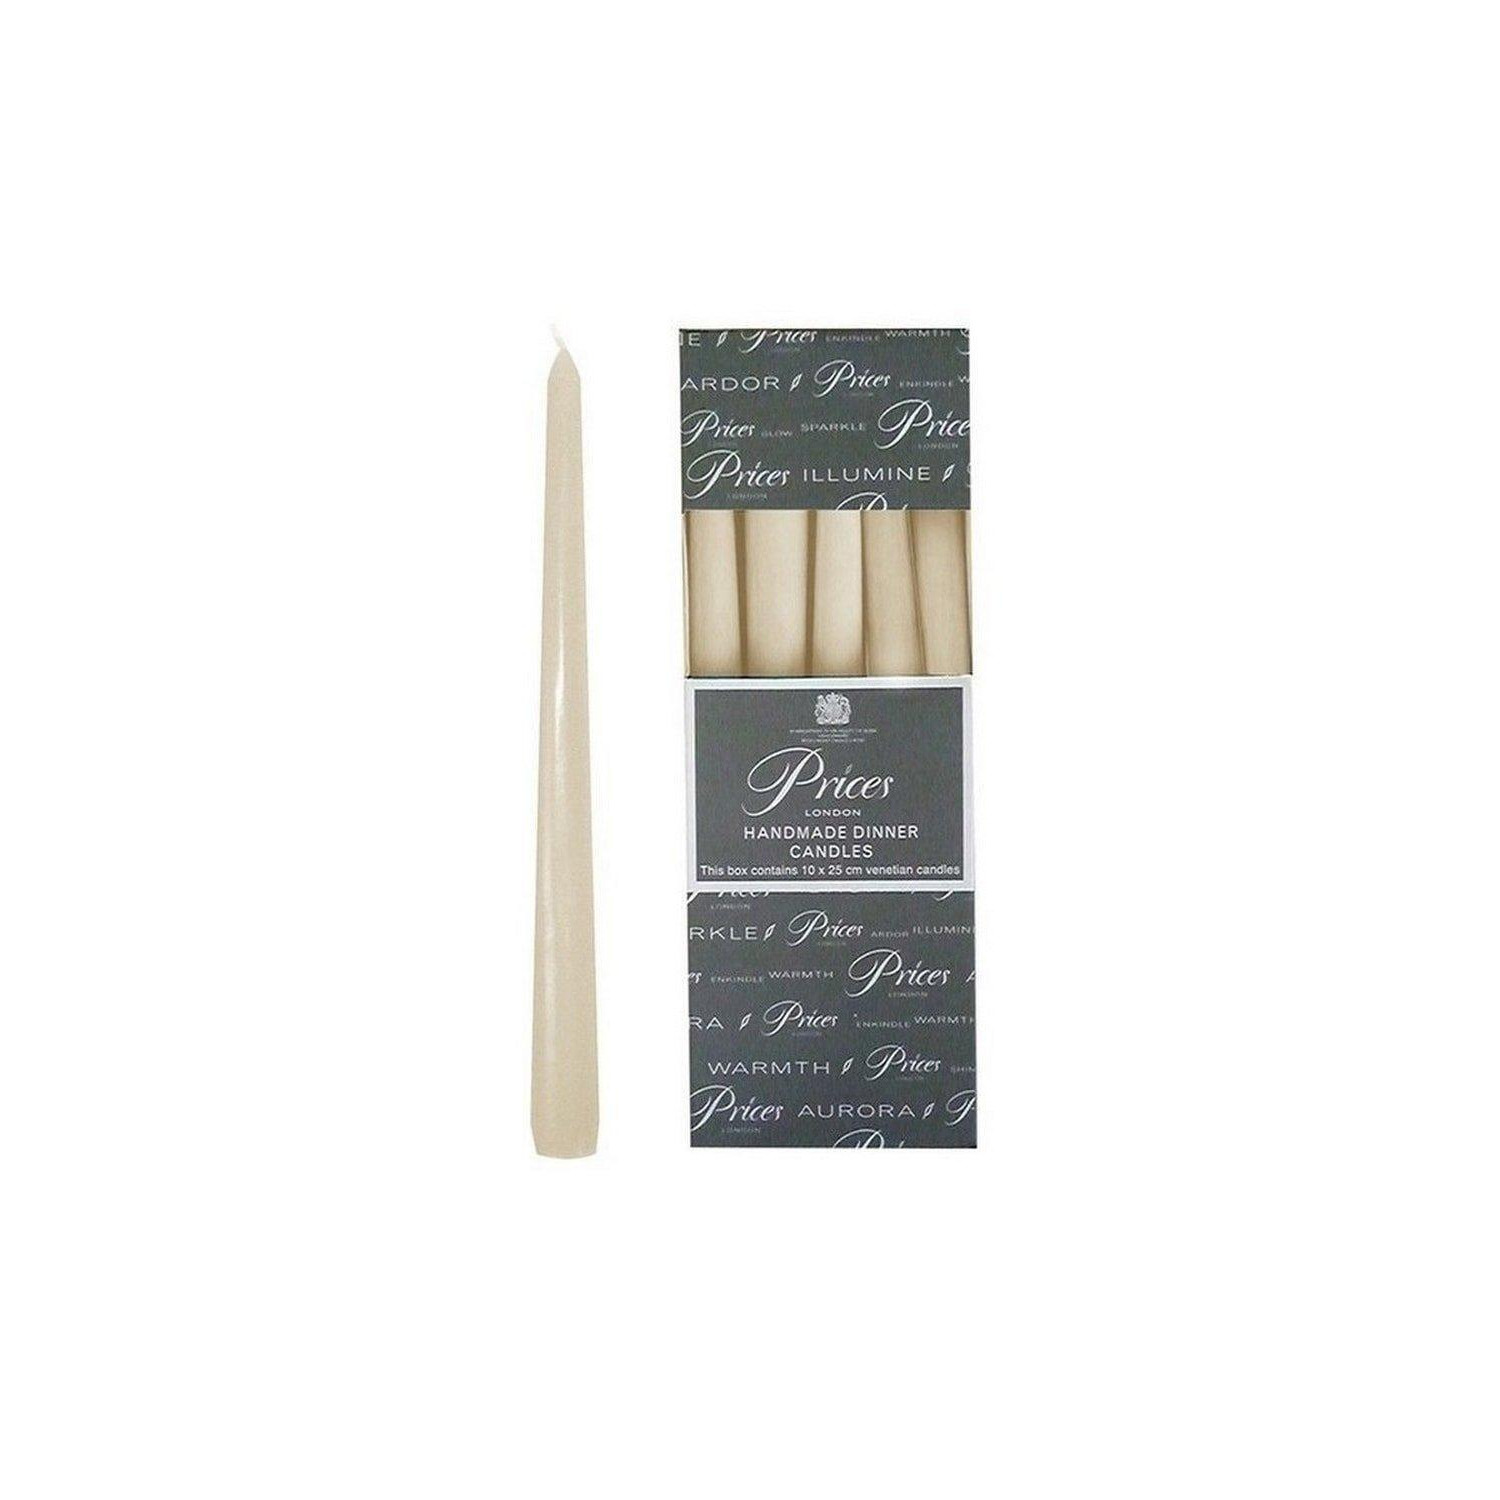 Venetian Candles (Pack Of 10) - image 1